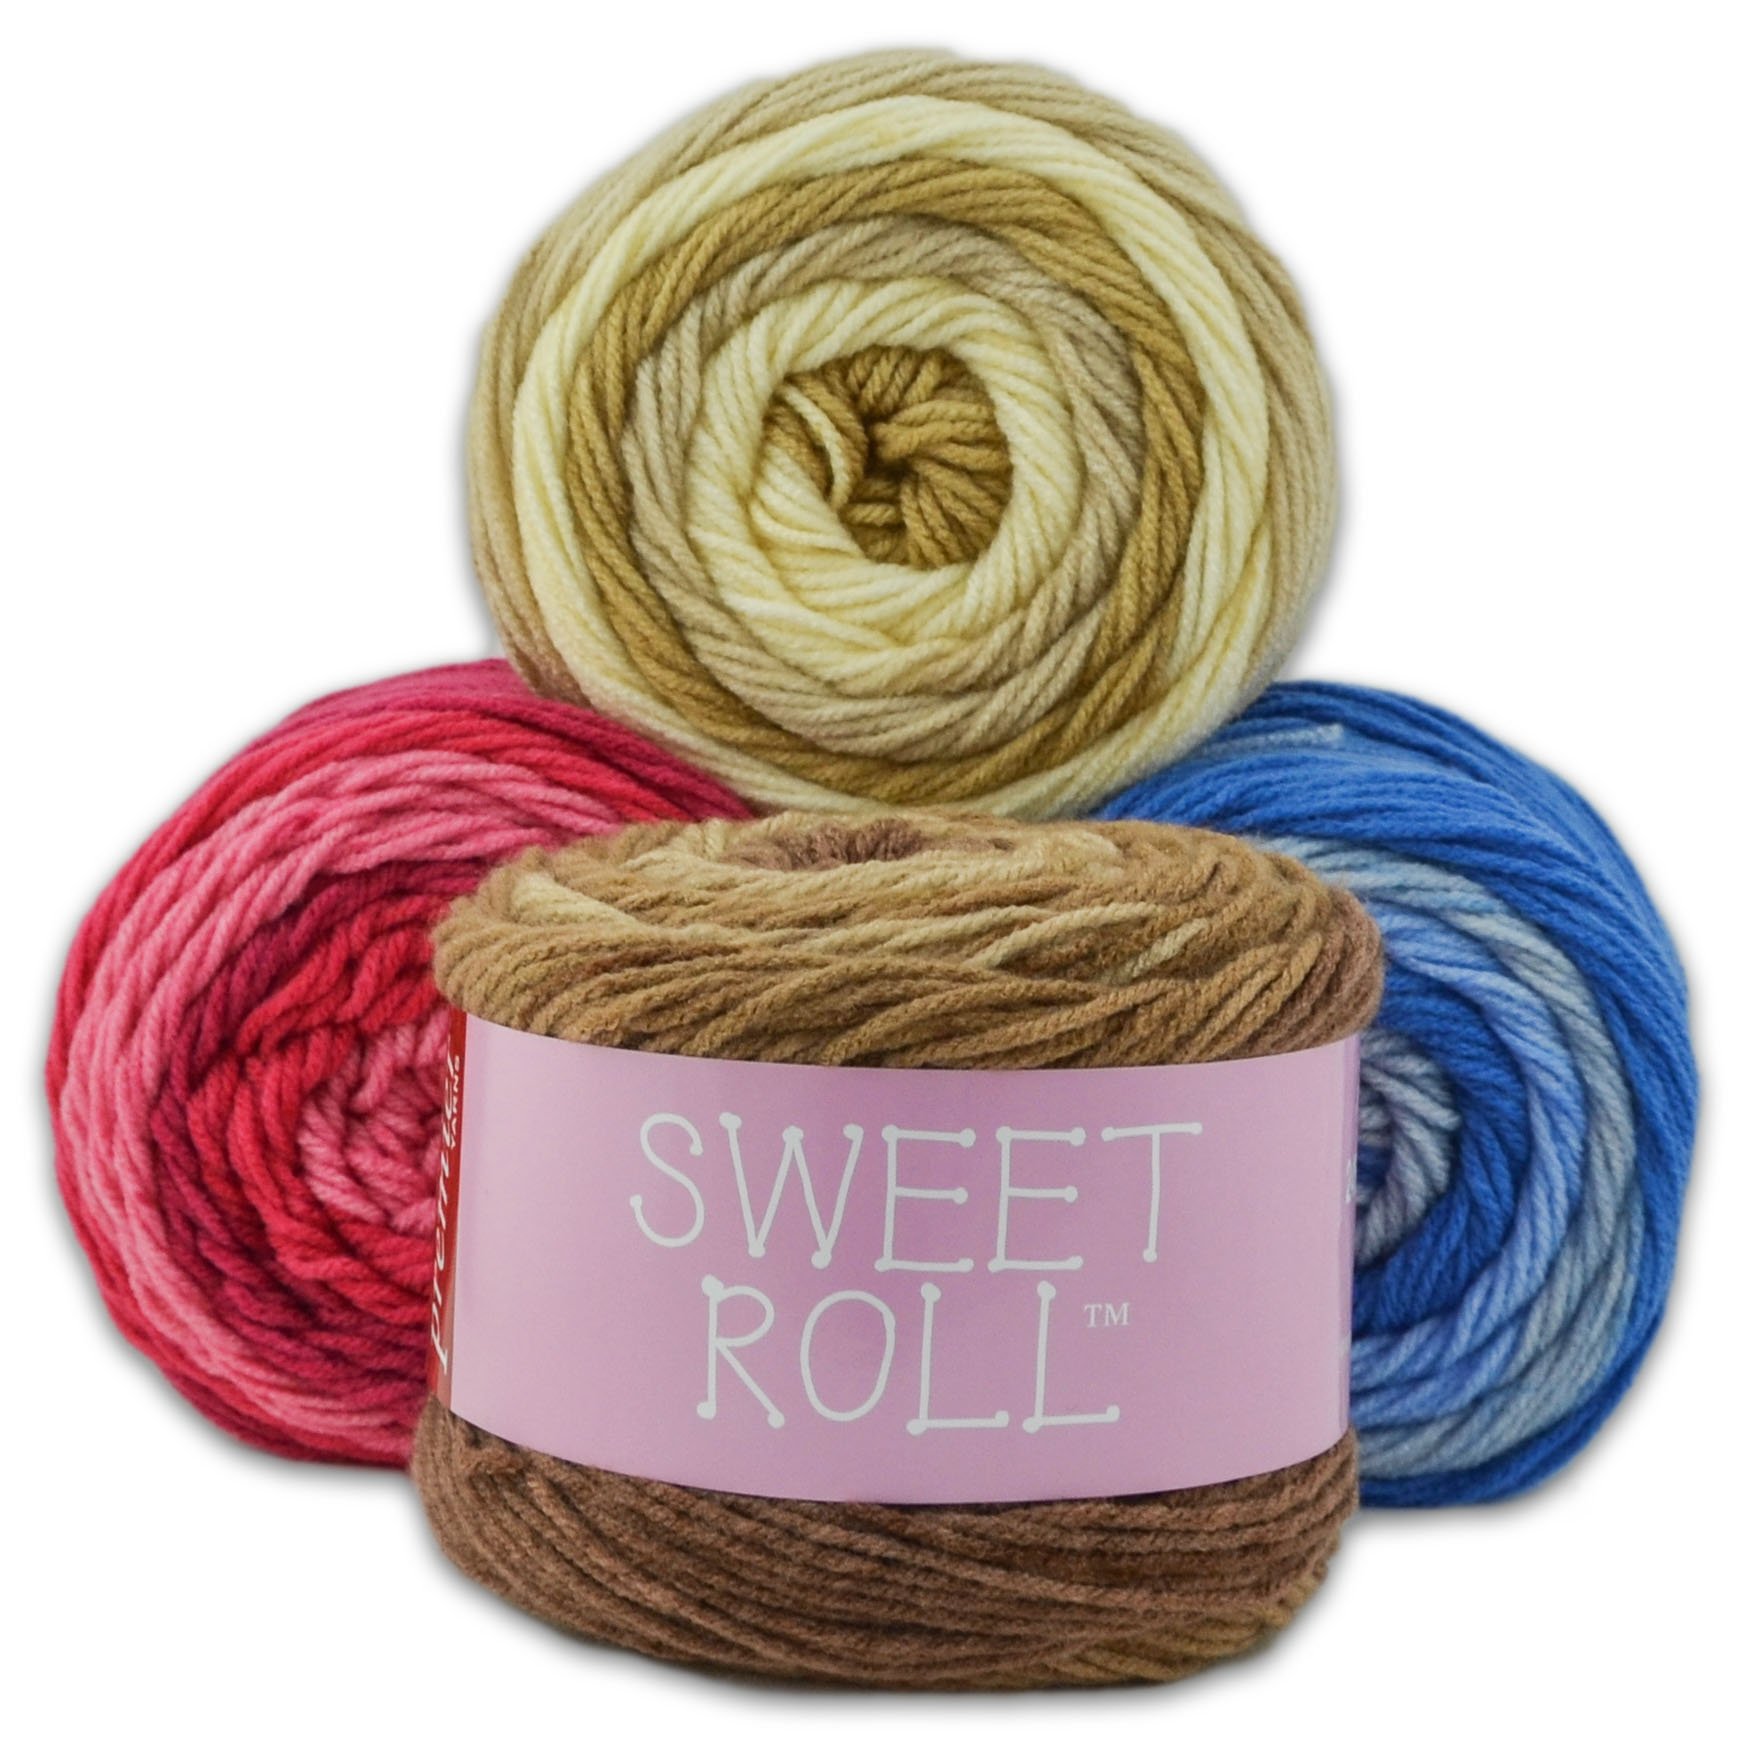 3 For $10 Premier® Sweet Roll™ Yarn - Select Colors - 33% Off ...